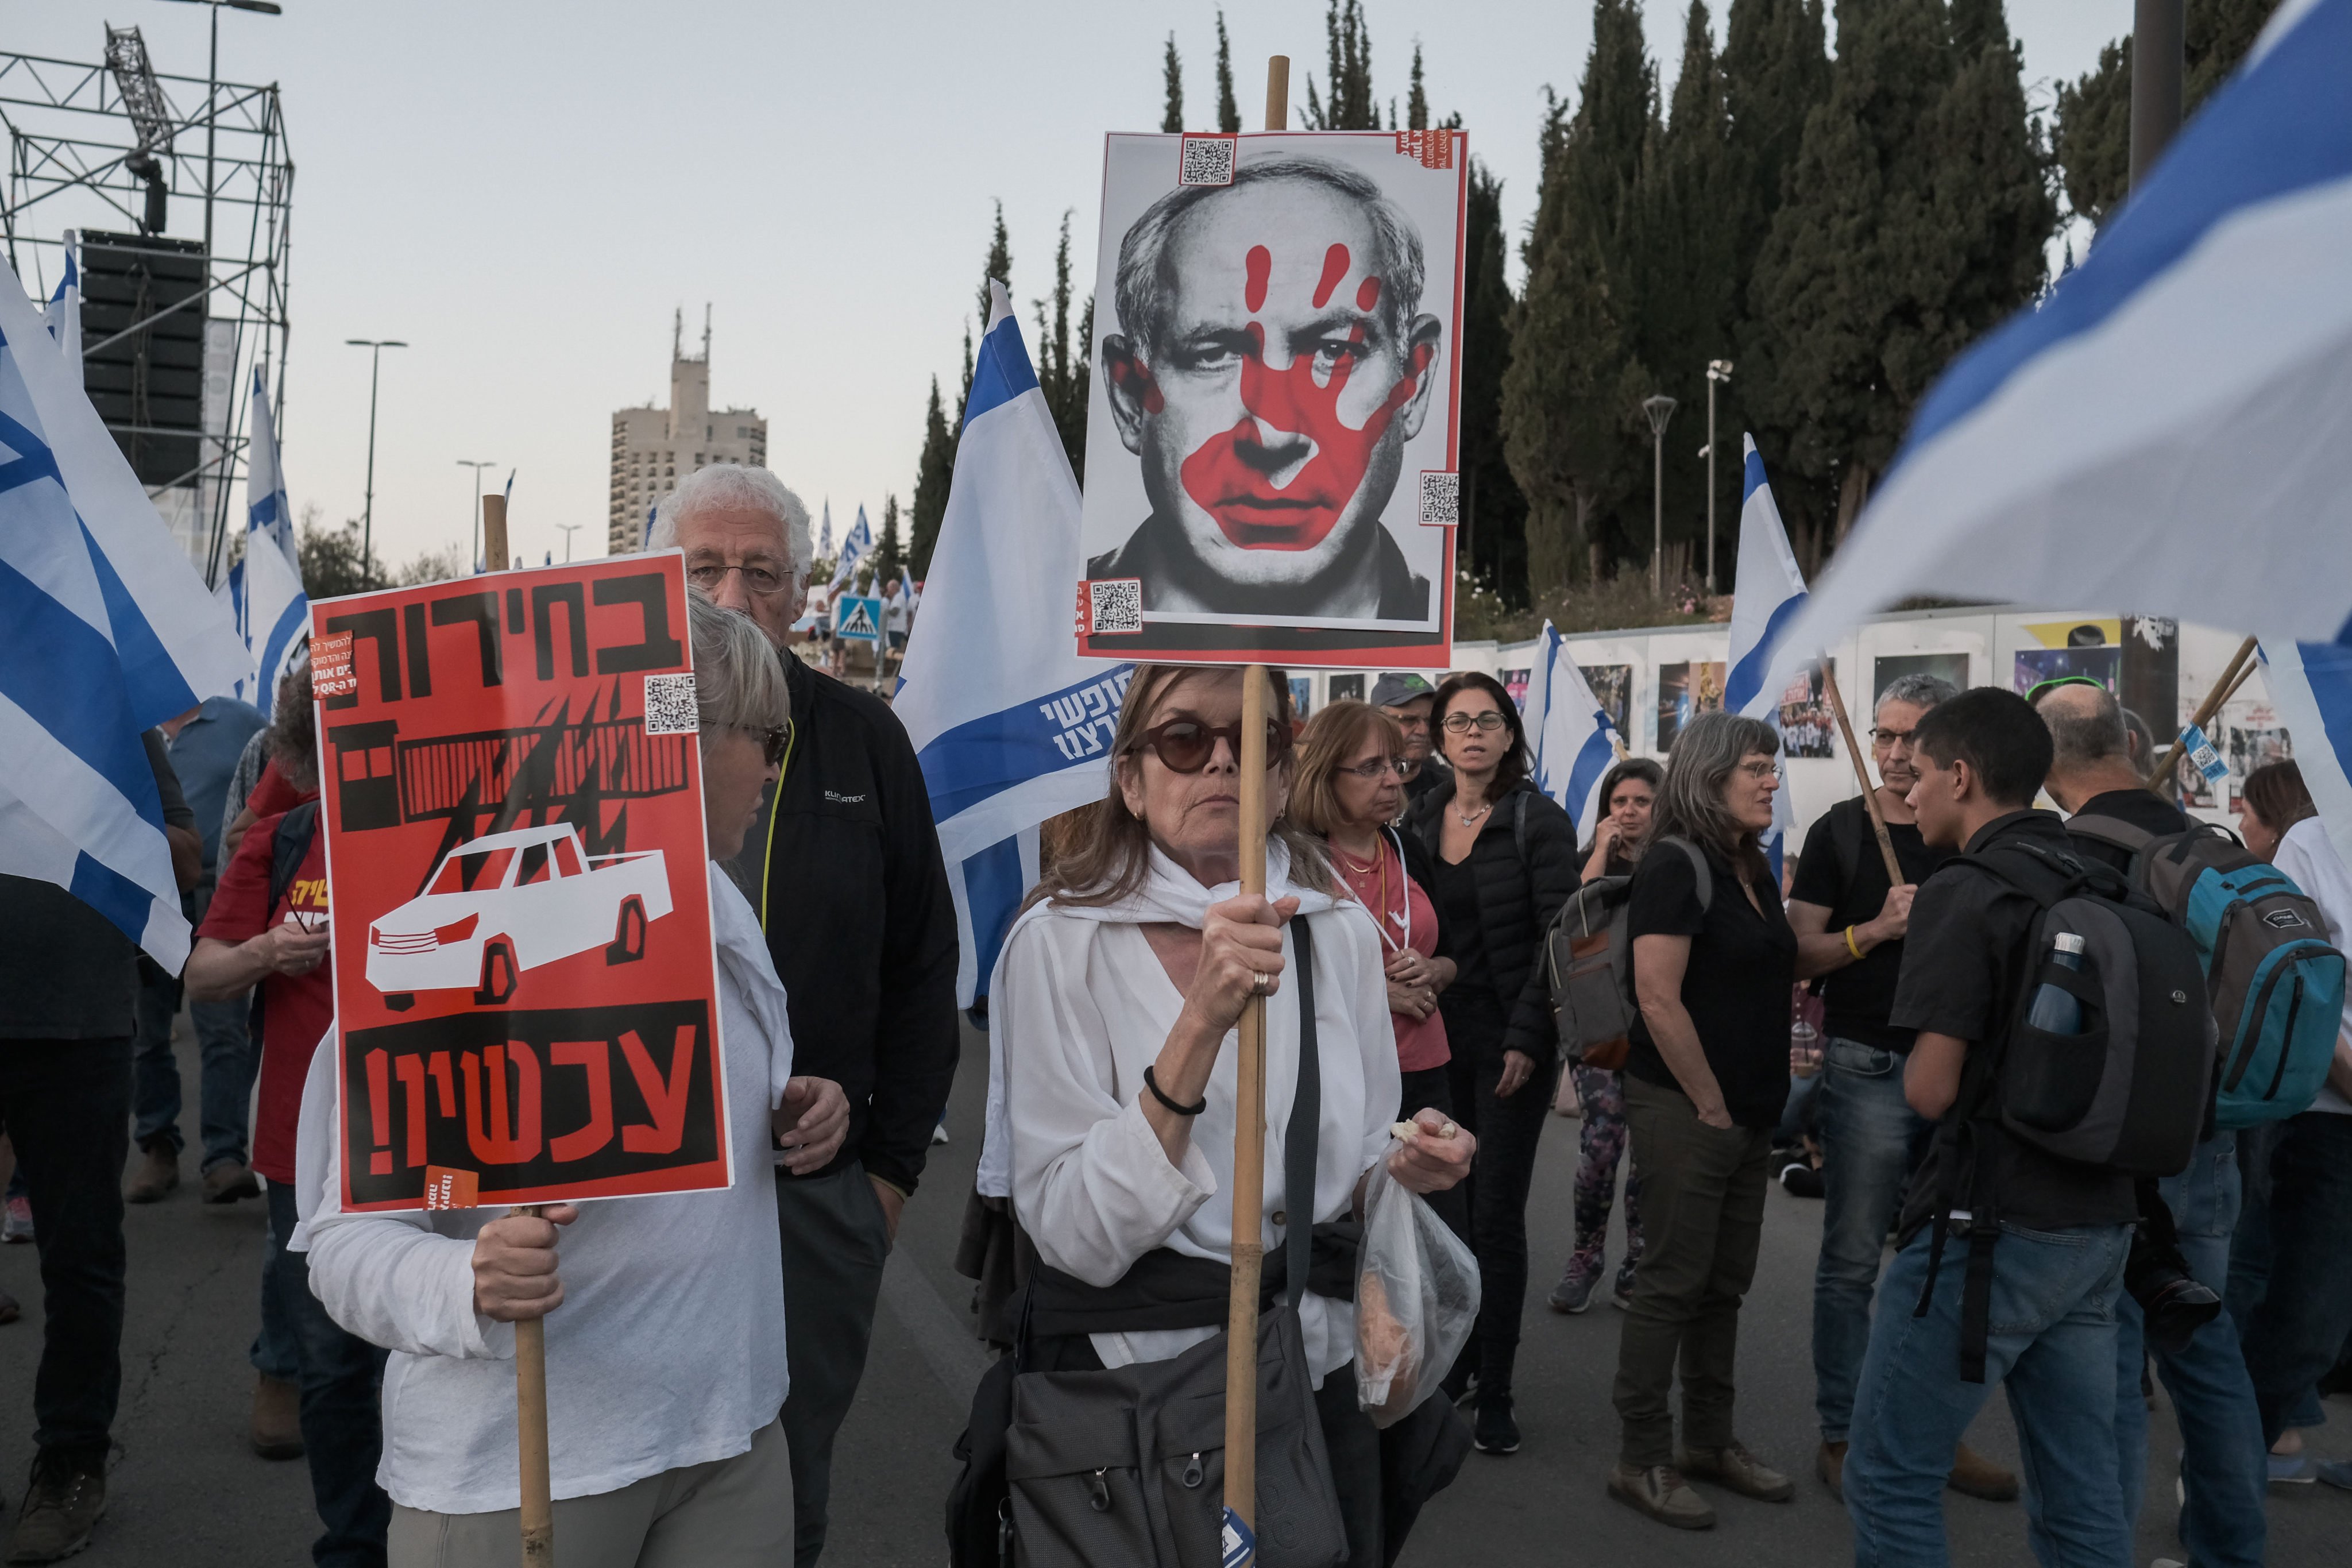 People take part in a protest against Israeli Prime Minister Benjamin Netanyahu in Jerusalem on Sunday. Photo: dpa